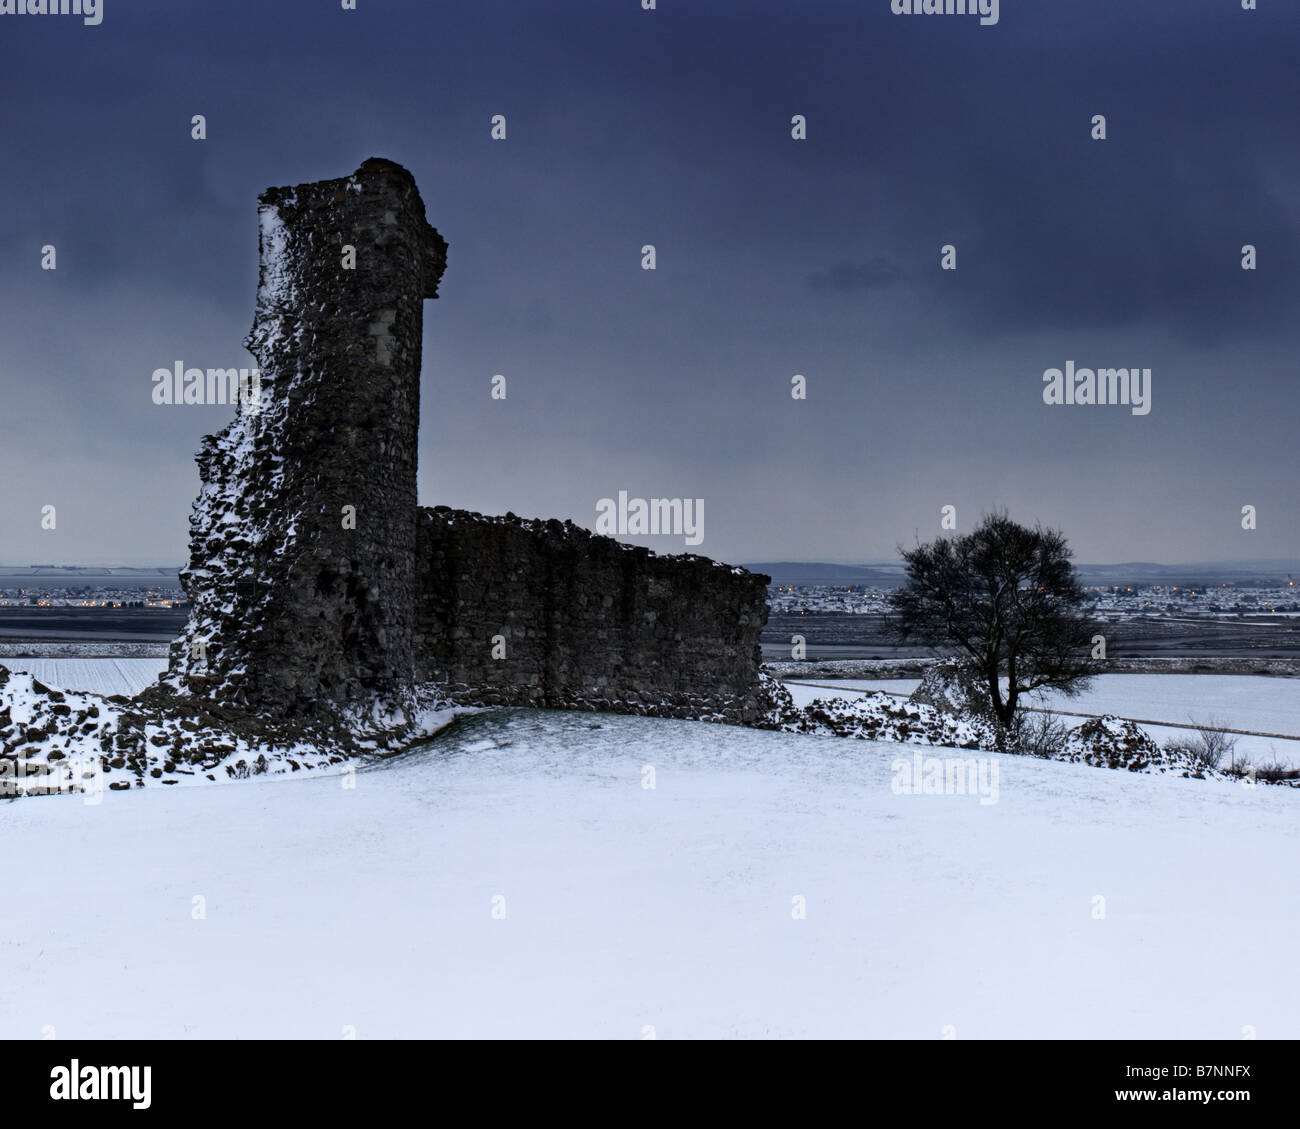 SOUTHEND-ON-SEA, ESSEX, UK - FEBRUARY 03, 2009:  View of Hadleigh Castle in winter with snow on the ground Stock Photo